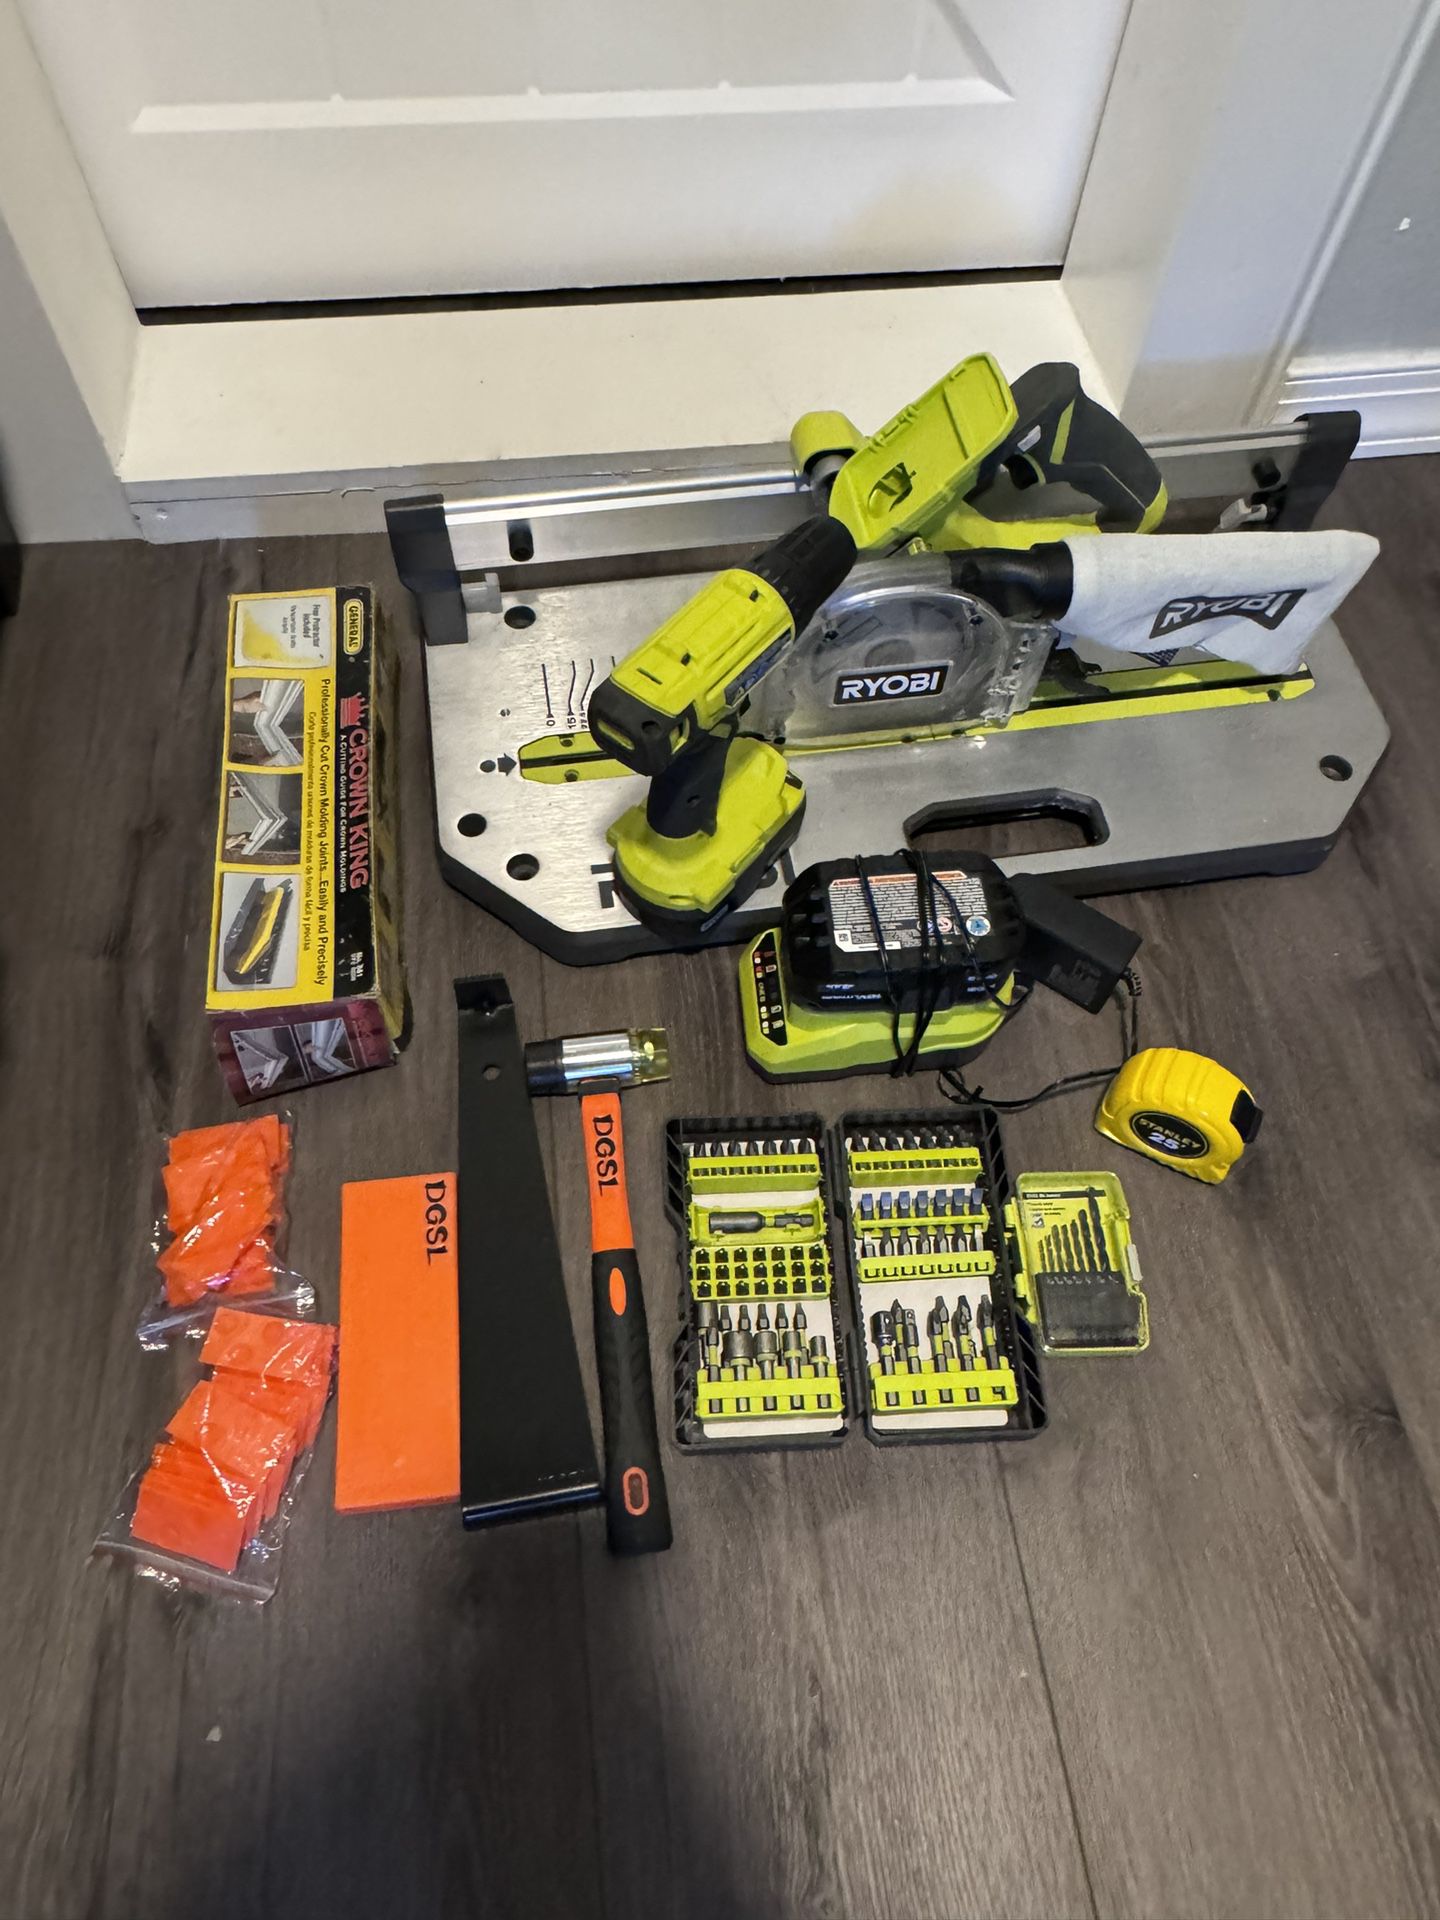 Cordless Flooring Saw with Blade, High Capacity Battery, Drill, Crown Molding Guide And Flooring Tools